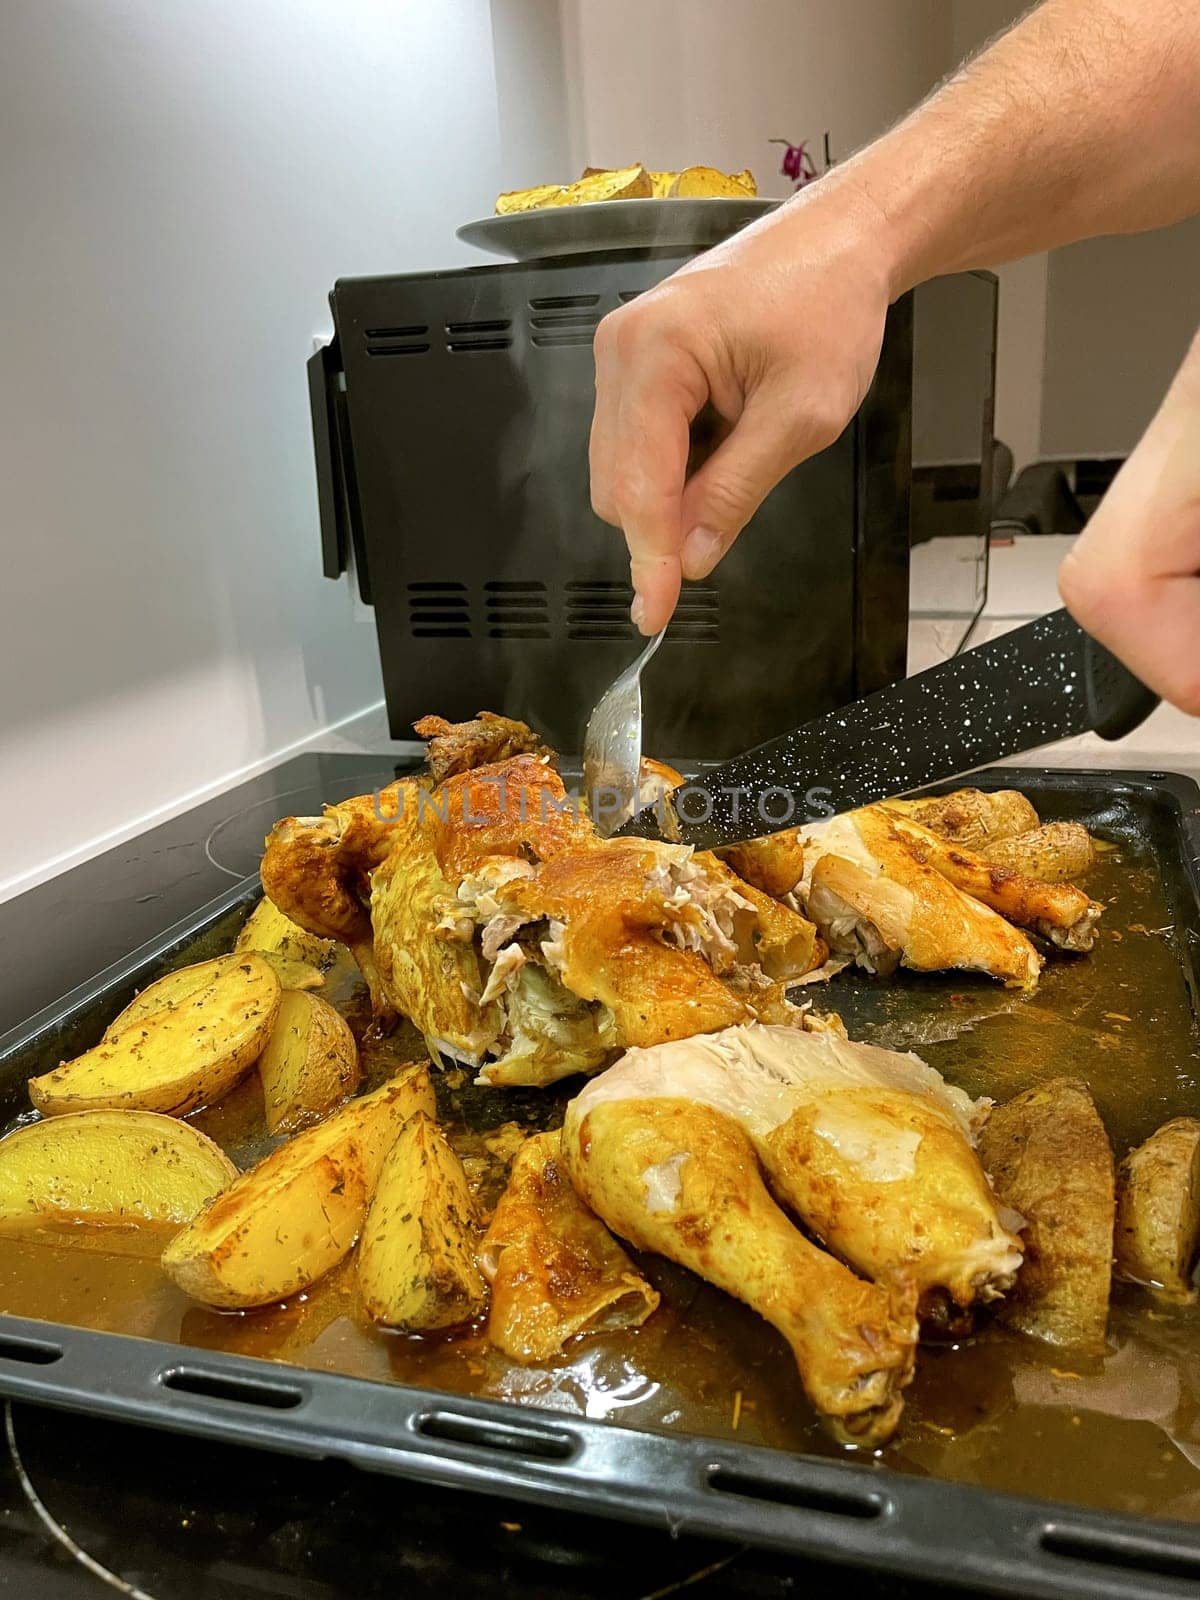 Hands cut baked chicken with potatoes with a knife. High quality photo